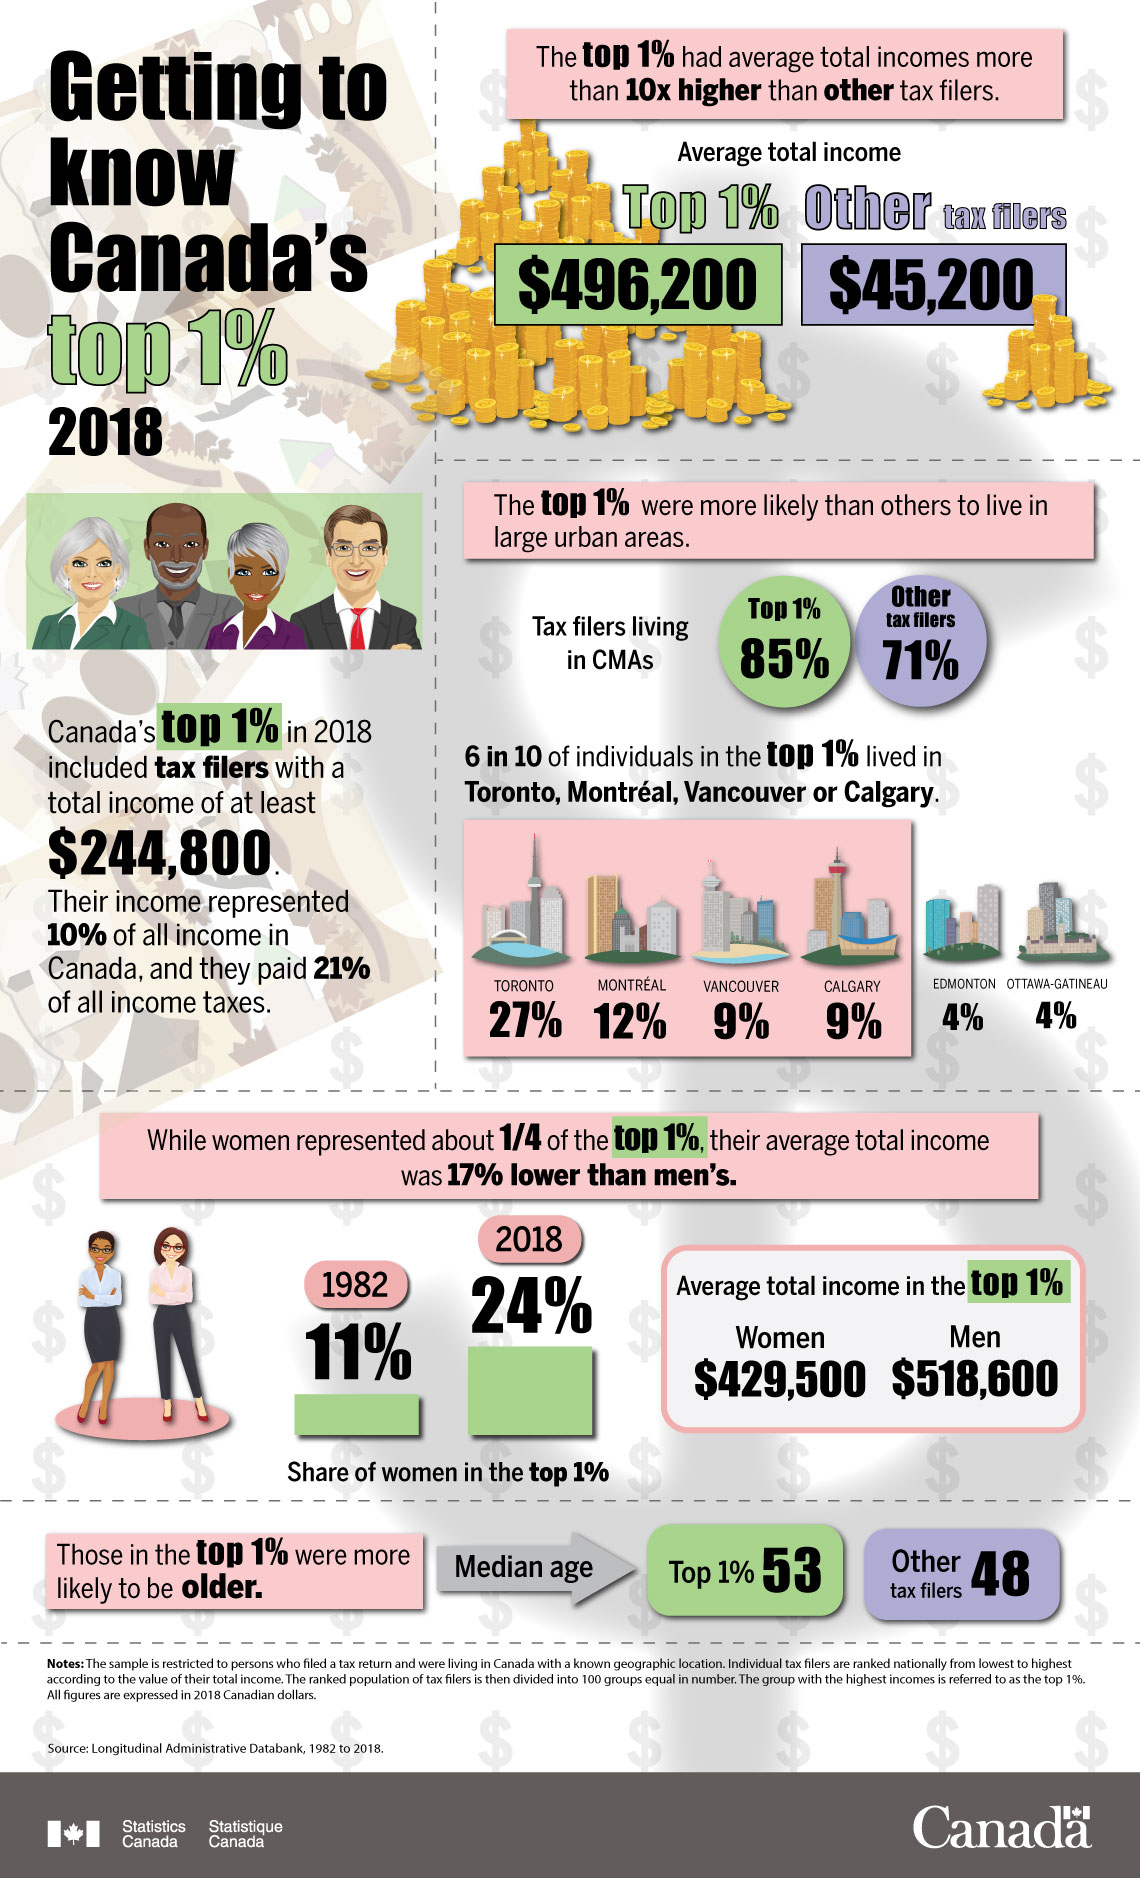 Infographic: Getting to know Canada’s top 1% 2018